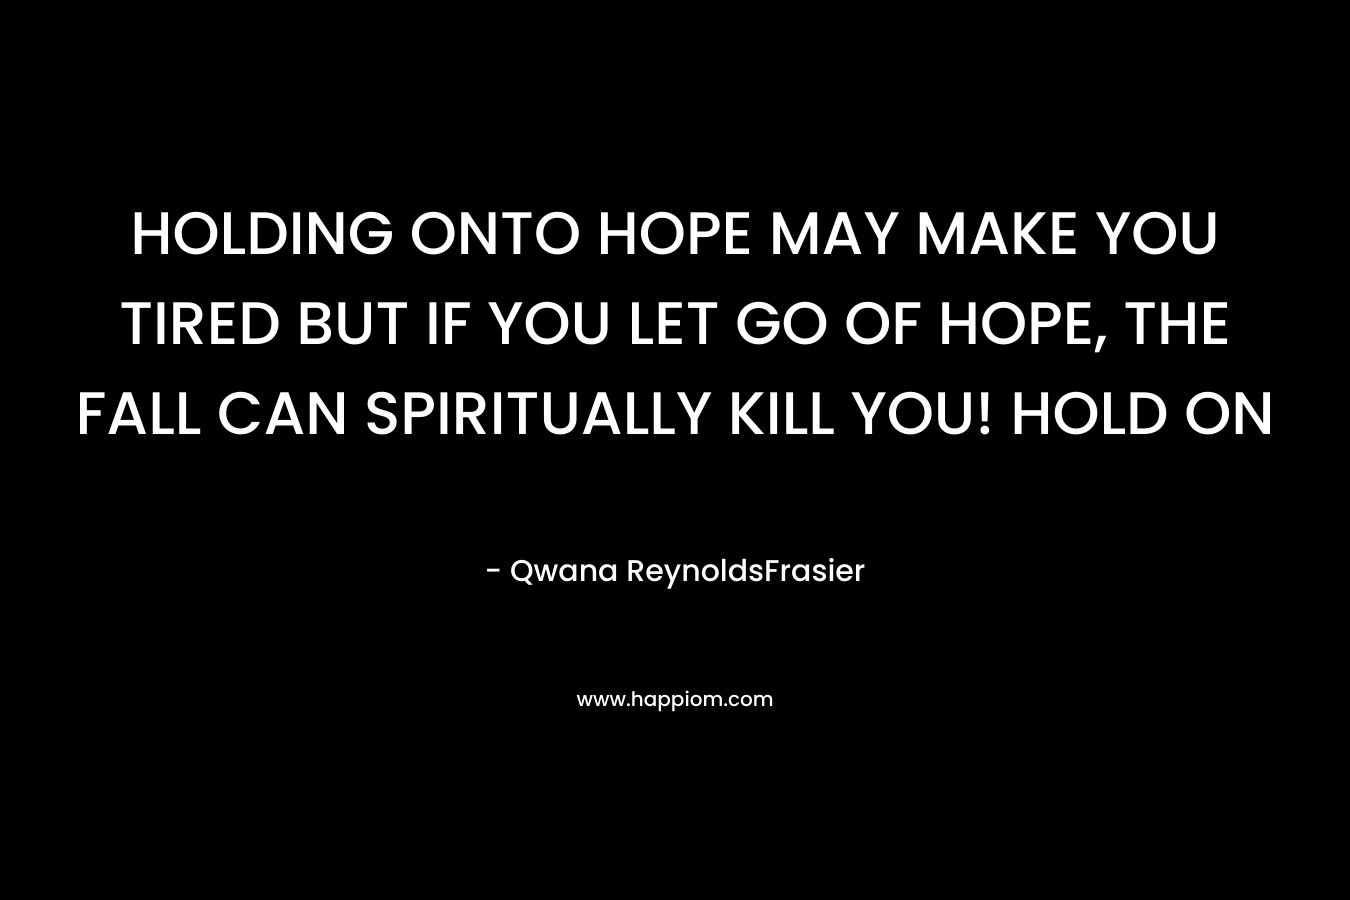 HOLDING ONTO HOPE MAY MAKE YOU TIRED BUT IF YOU LET GO OF HOPE, THE FALL CAN SPIRITUALLY KILL YOU! HOLD ON – Qwana ReynoldsFrasier